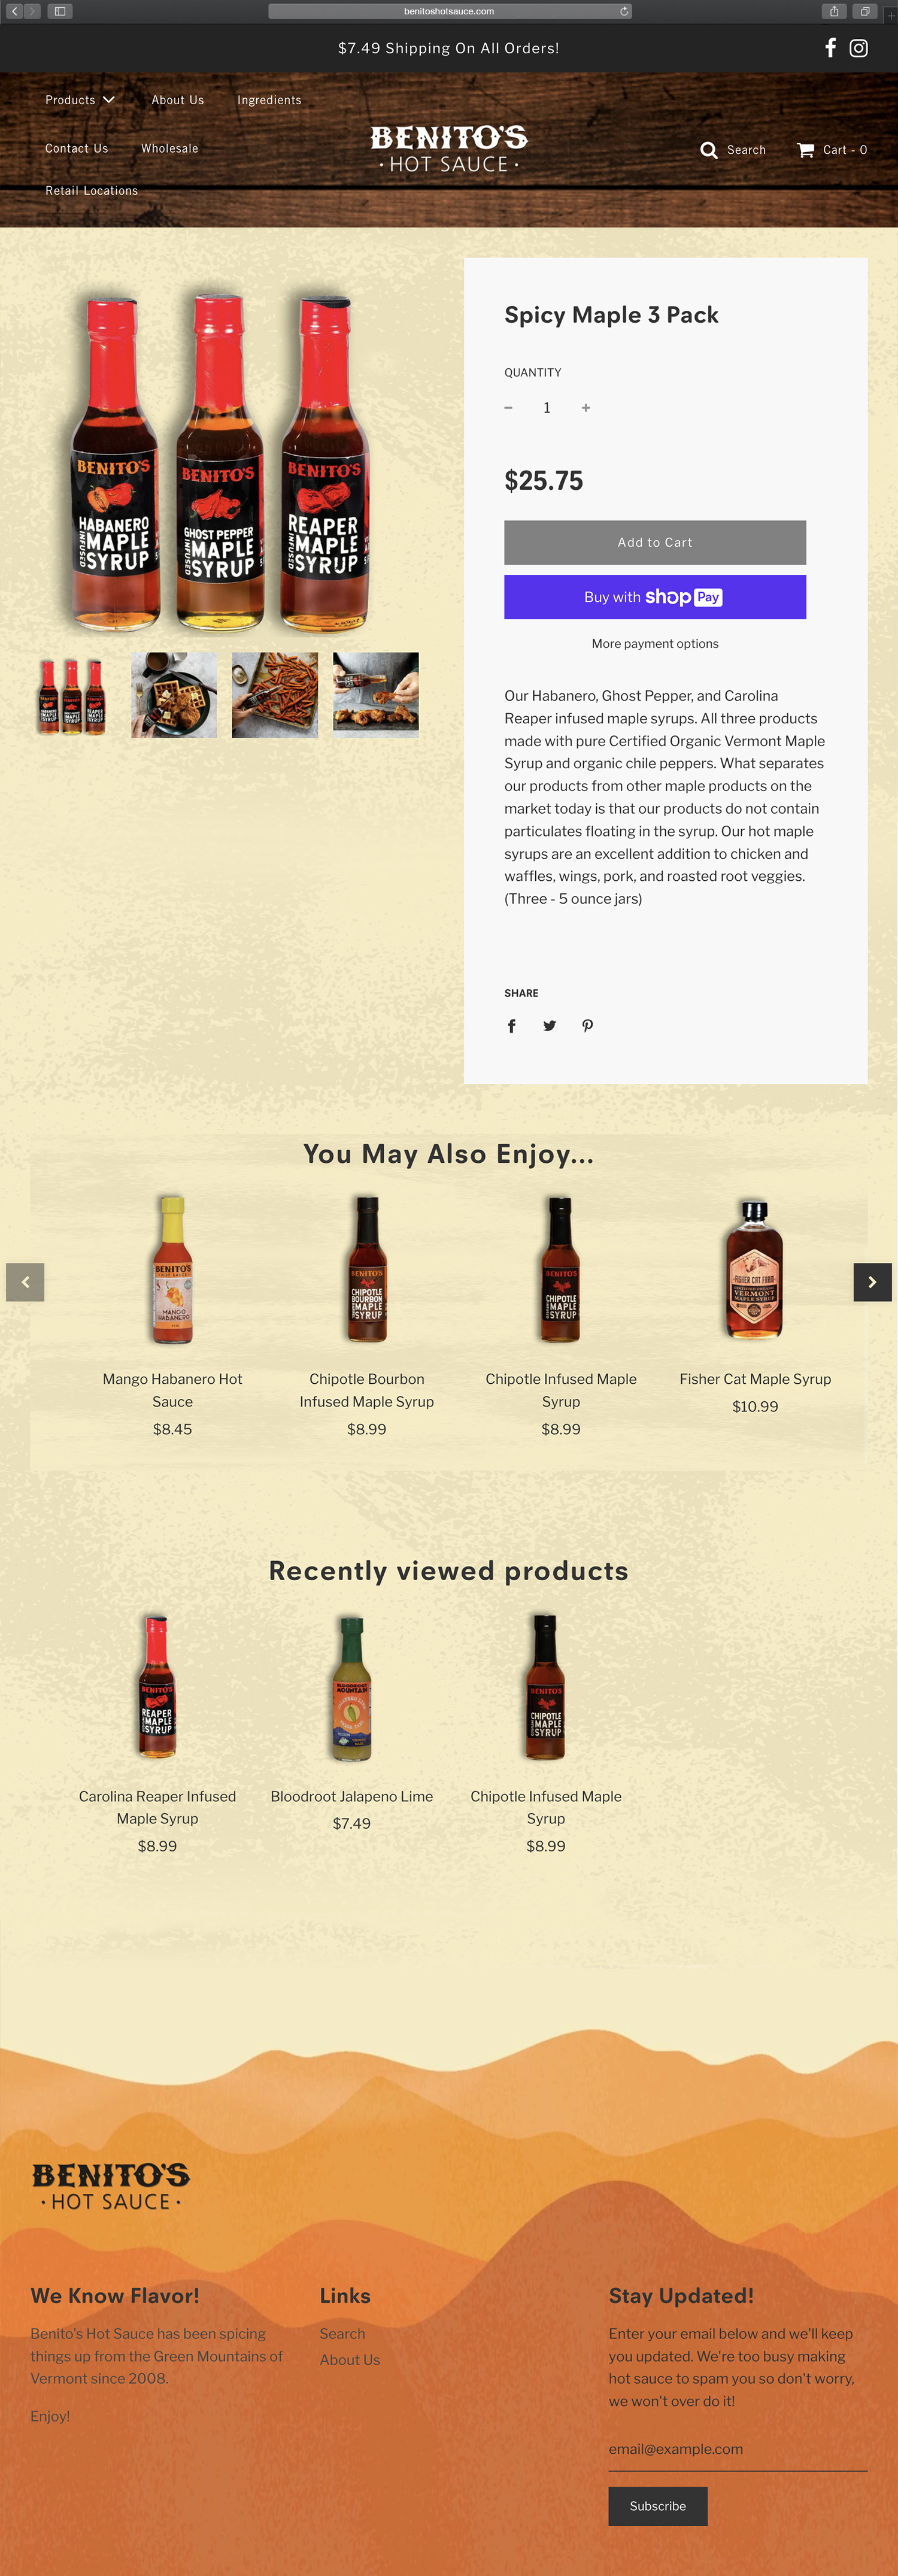 Website design and website development for Benitos - secondary page view.